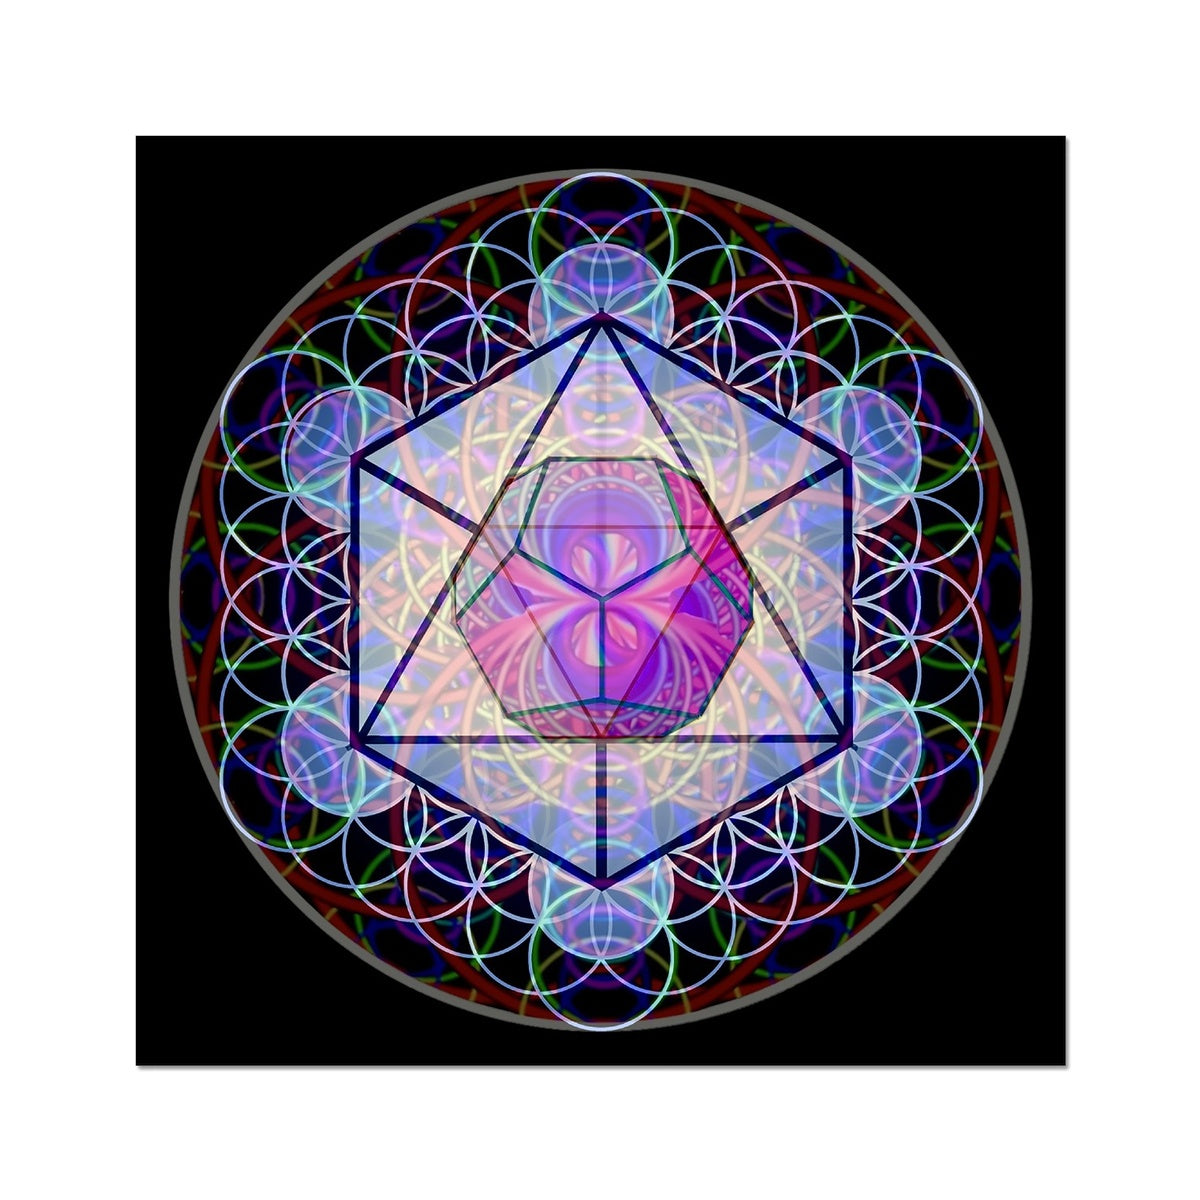 The Platonic Solid Dodecahedron with inverted Sound waves Fine Art Print